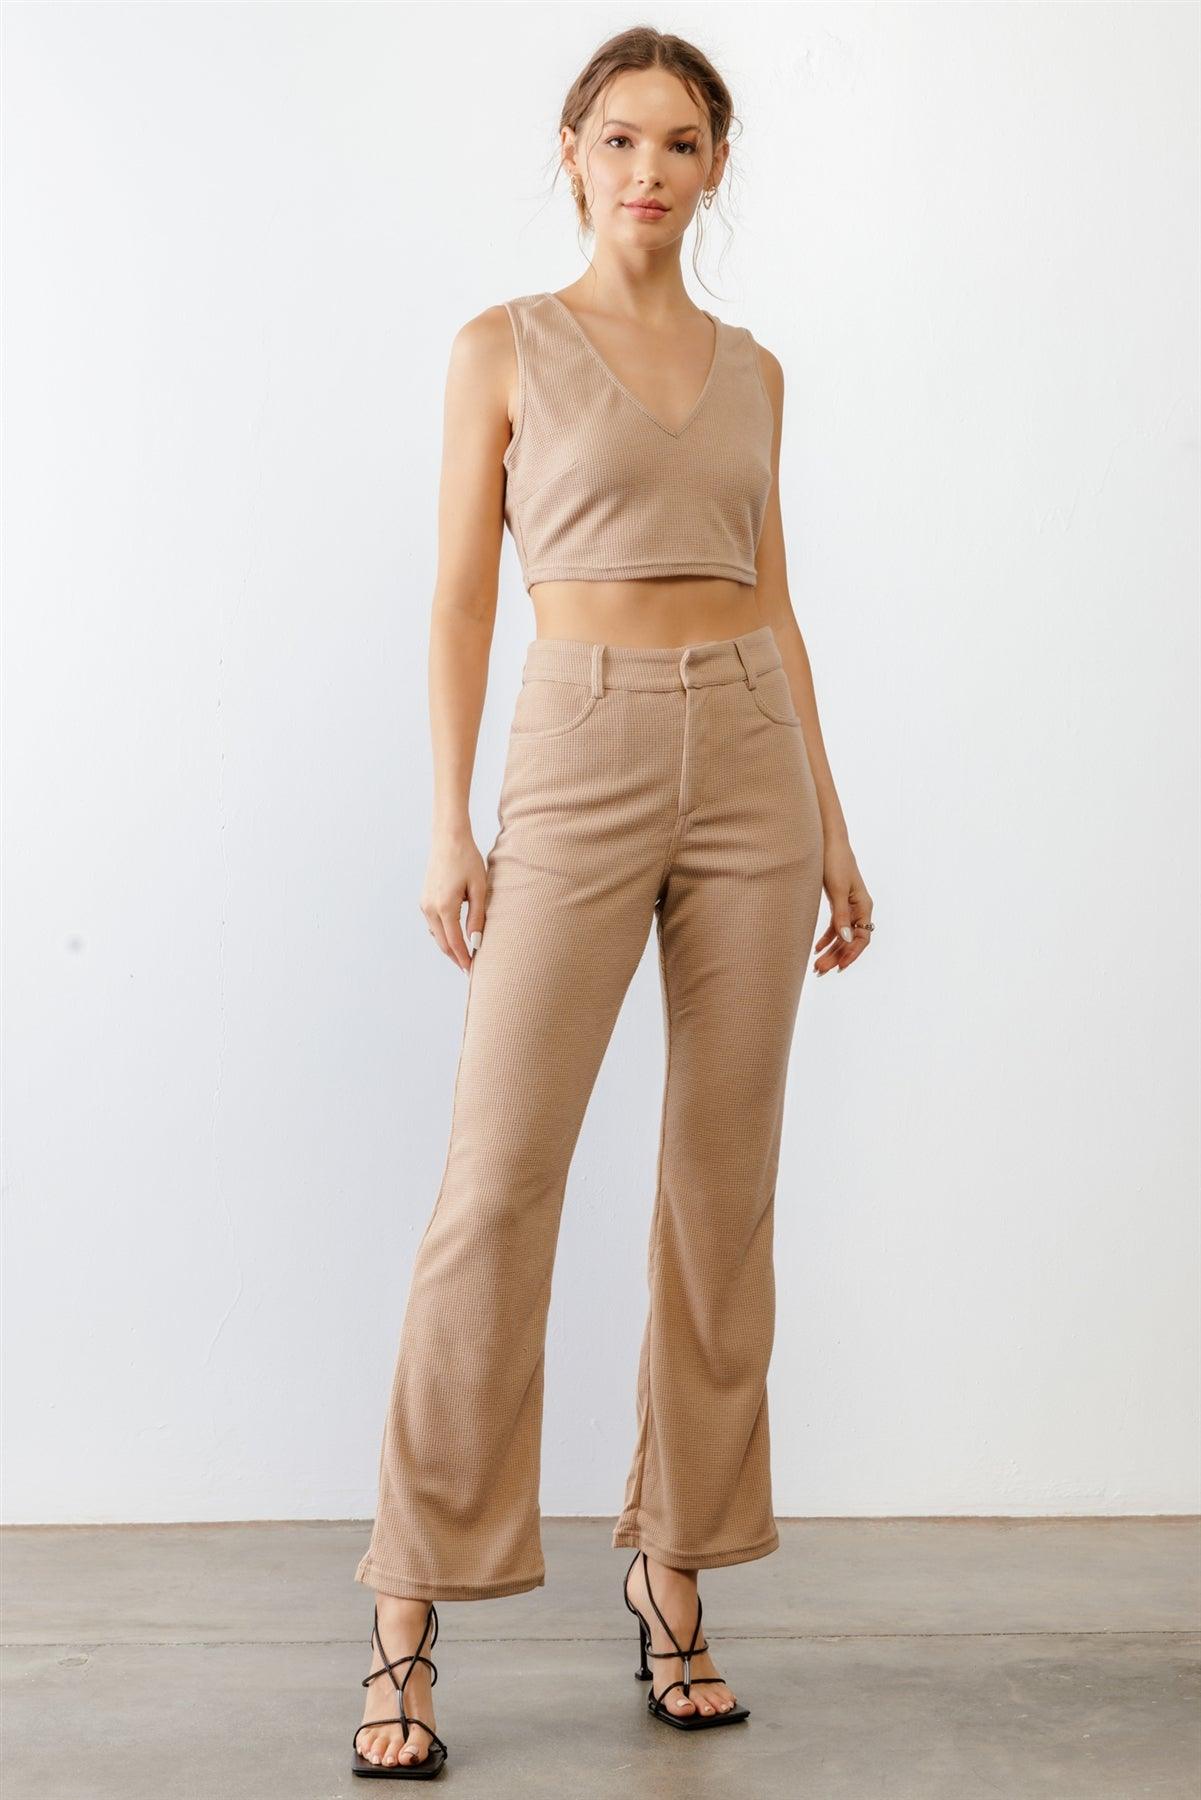 Taupe Waffle Knit Open Tie Back Crop Top & High Waist Four Pocket Pants Set /3-2-1